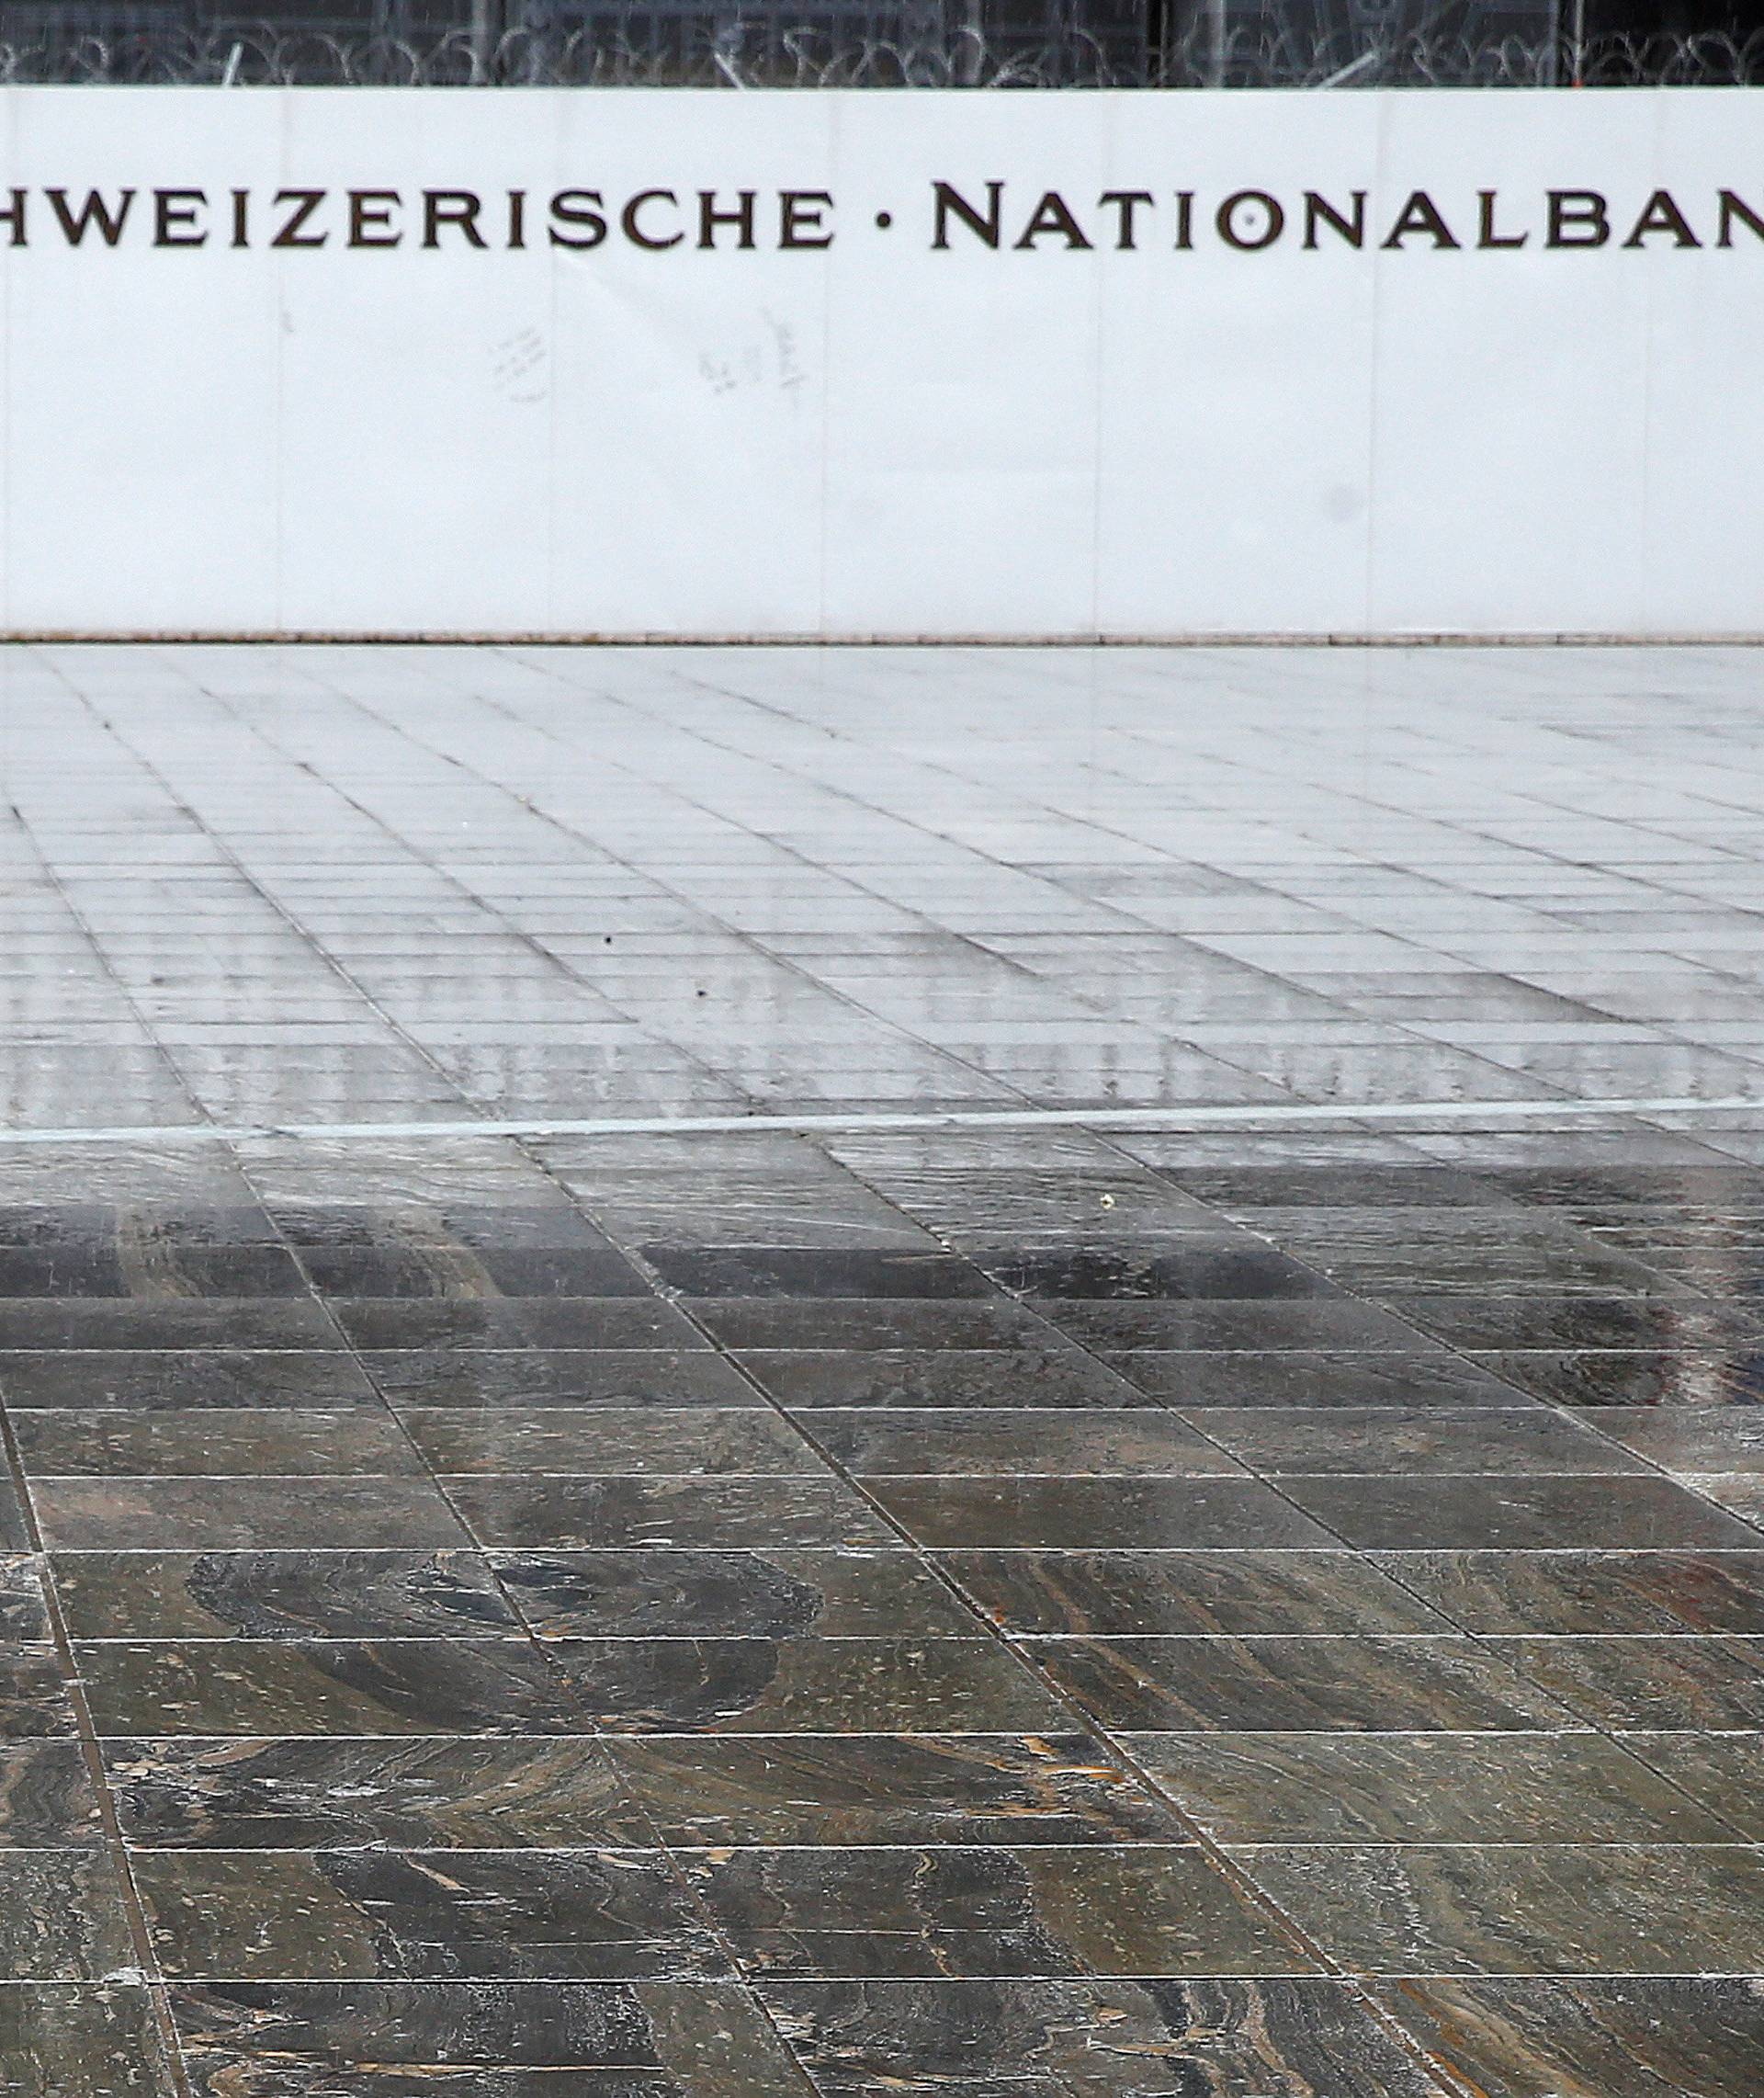 A man walks on the Federal Square in front of the Swiss National Bank in Bern